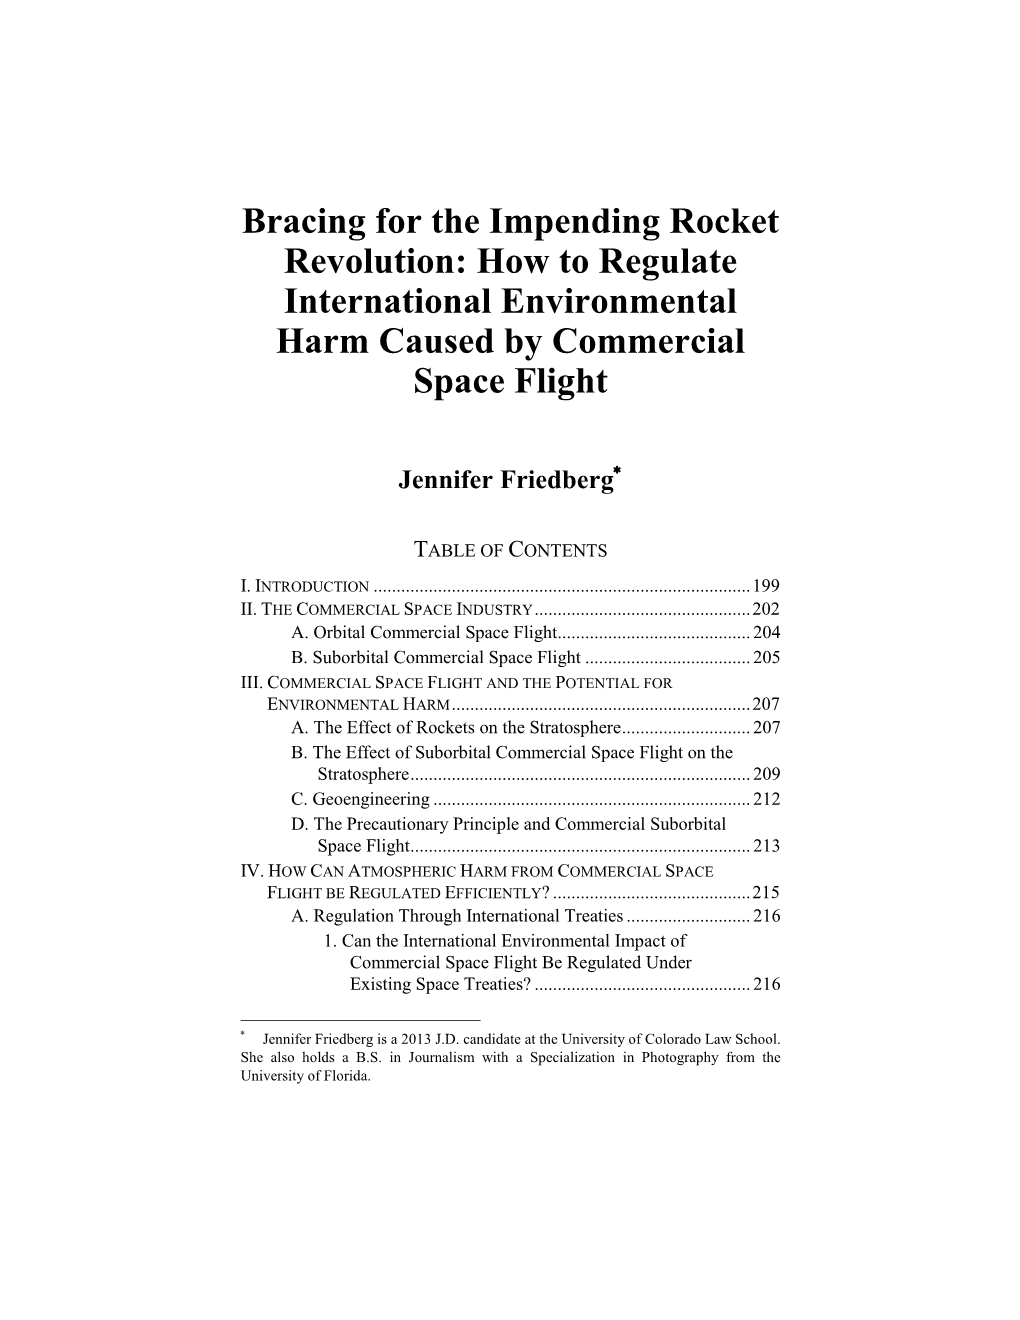 Bracing for the Impending Rocket Revolution: How to Regulate International Environmental Harm Caused by Commercial Space Flight